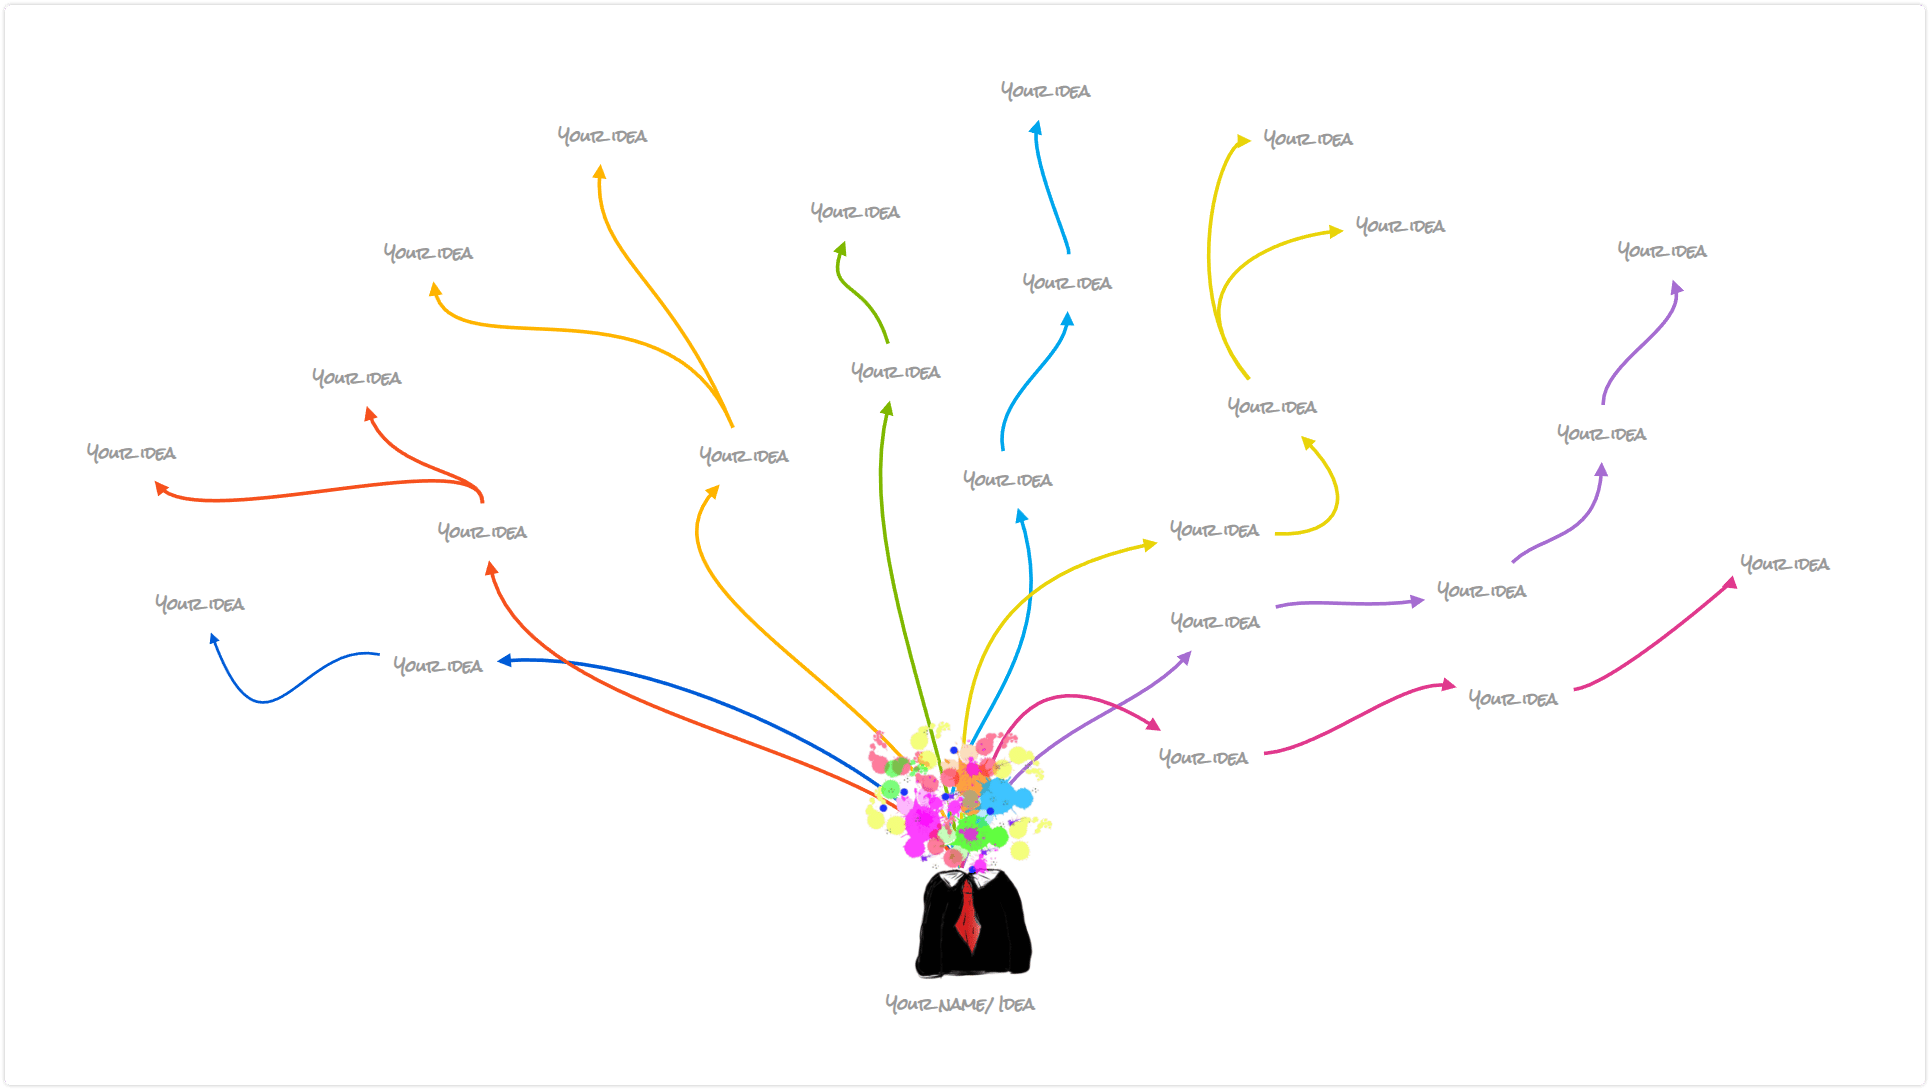 Mind map use - Brainstorming - Generate new ideas